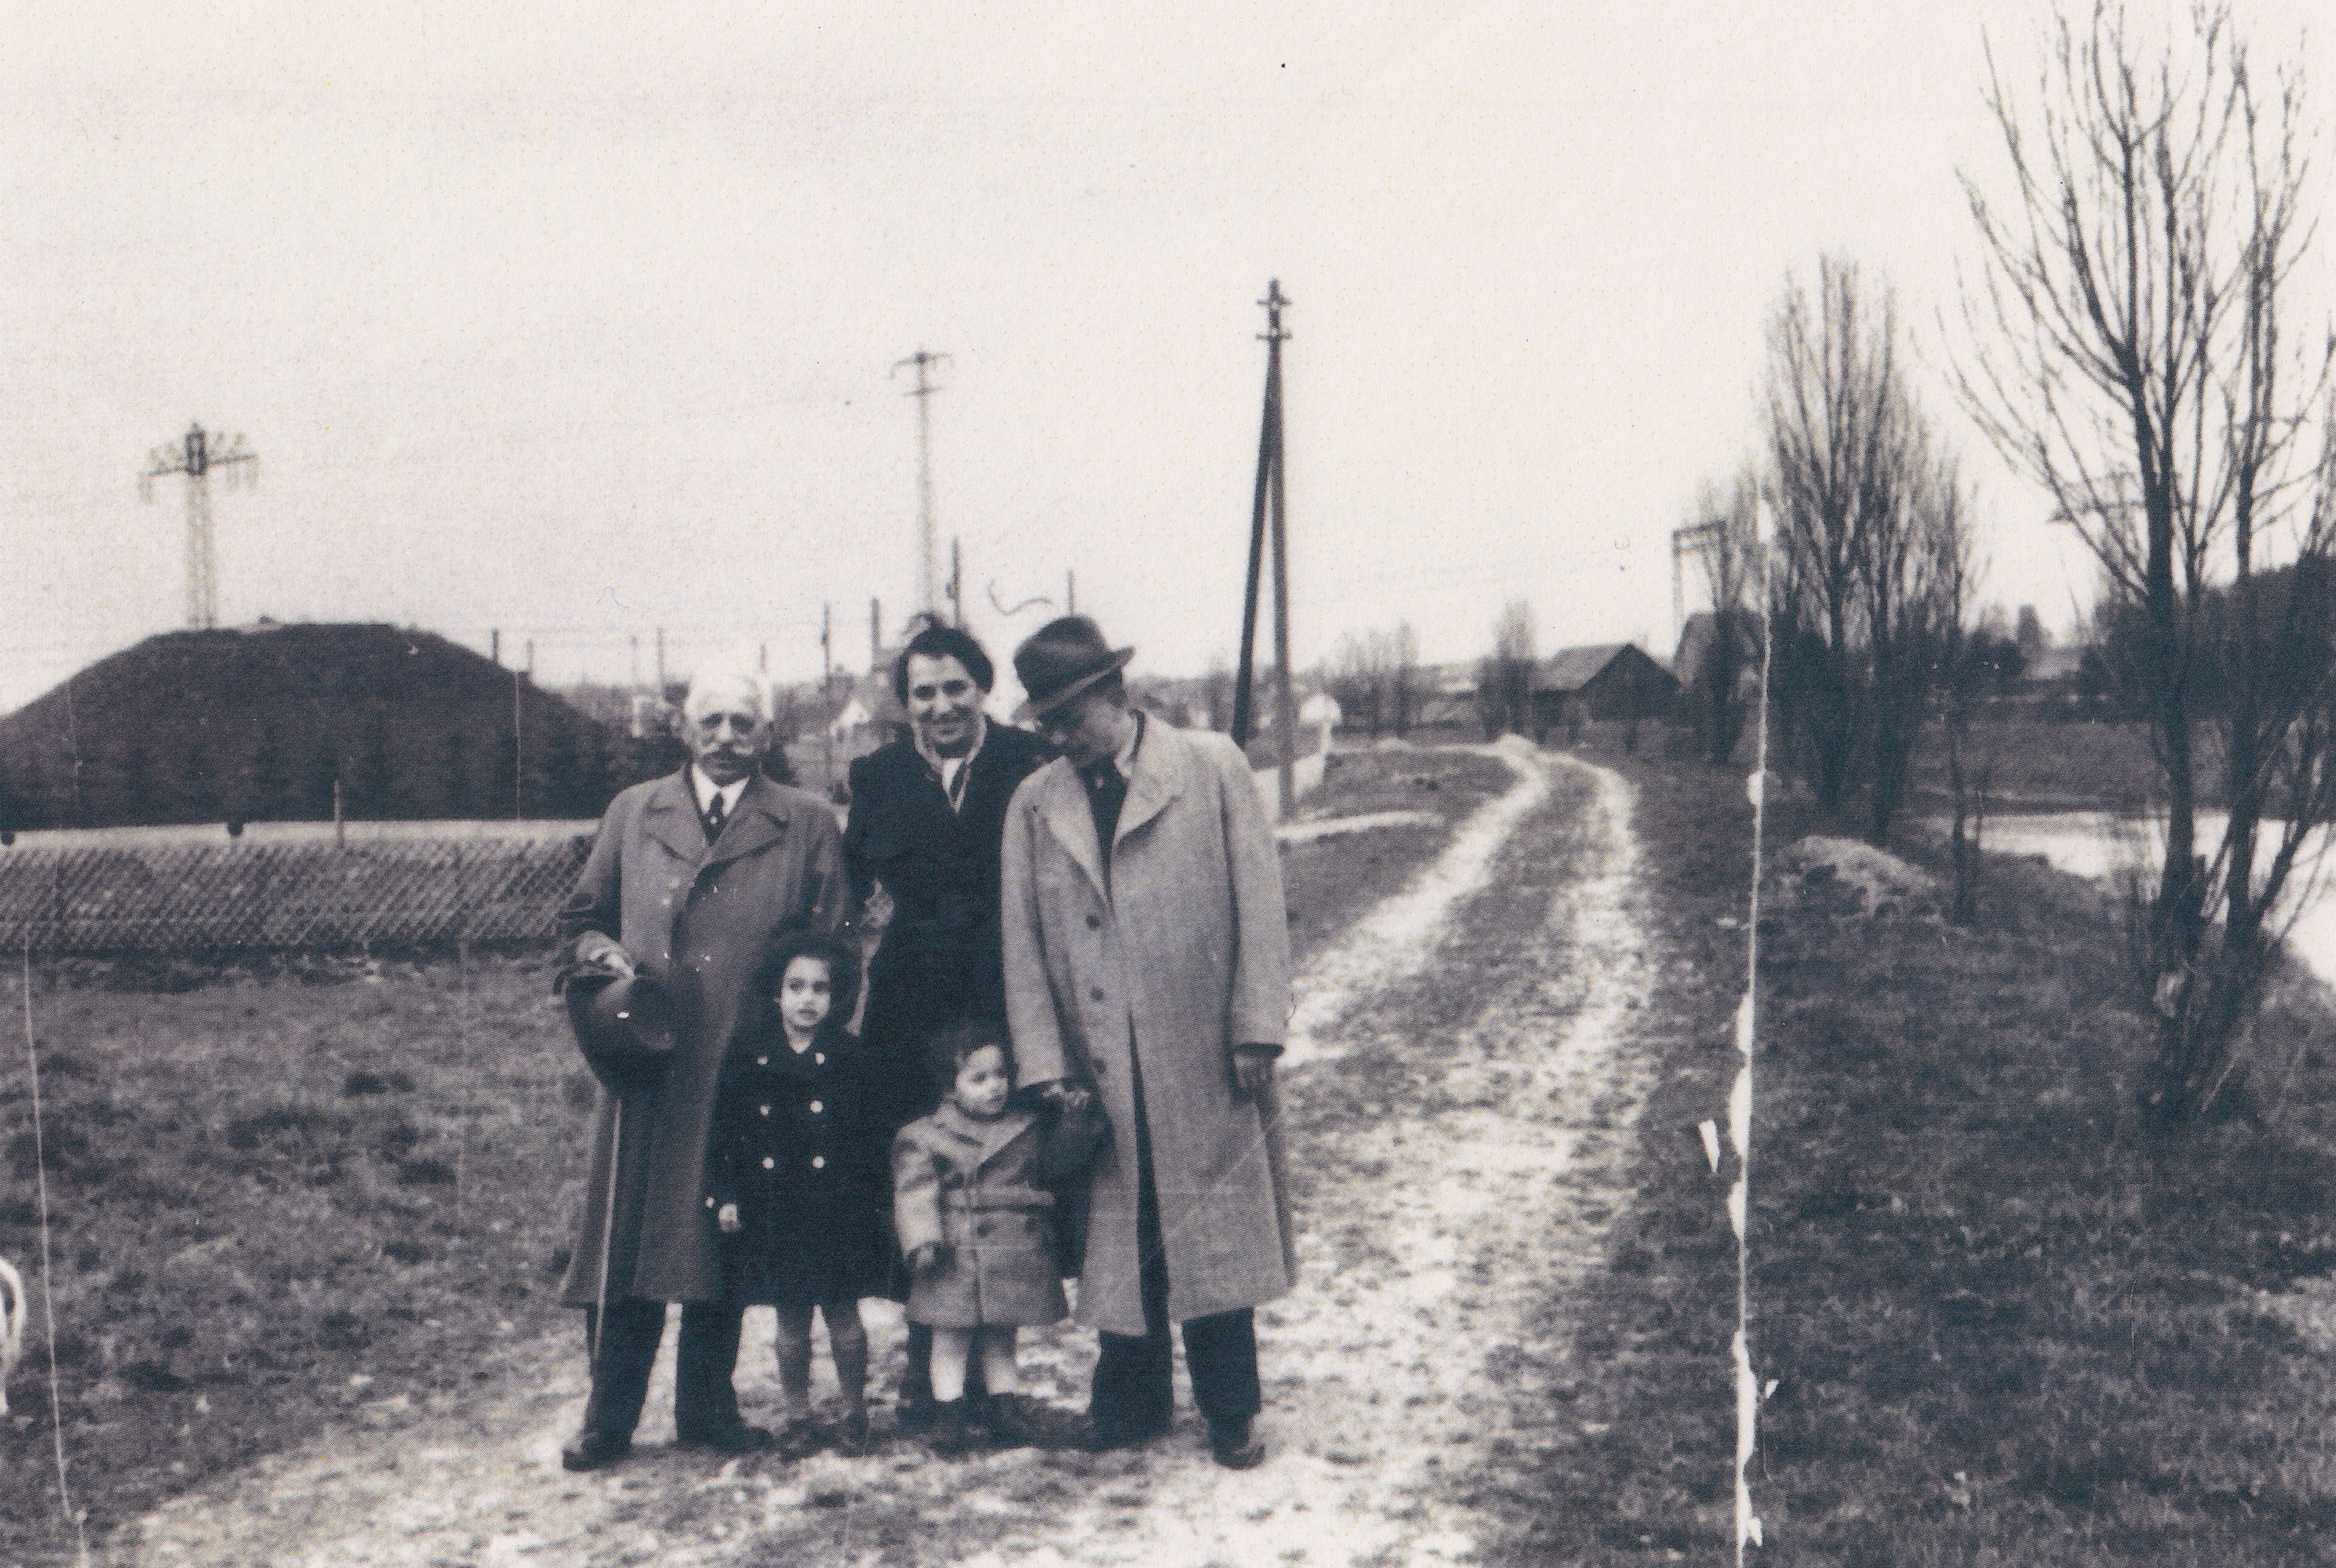 From left to right: Grandpa Michael Bloch, parents Else and Robert Gideon with Helga and Werner, Villingen, 1937.